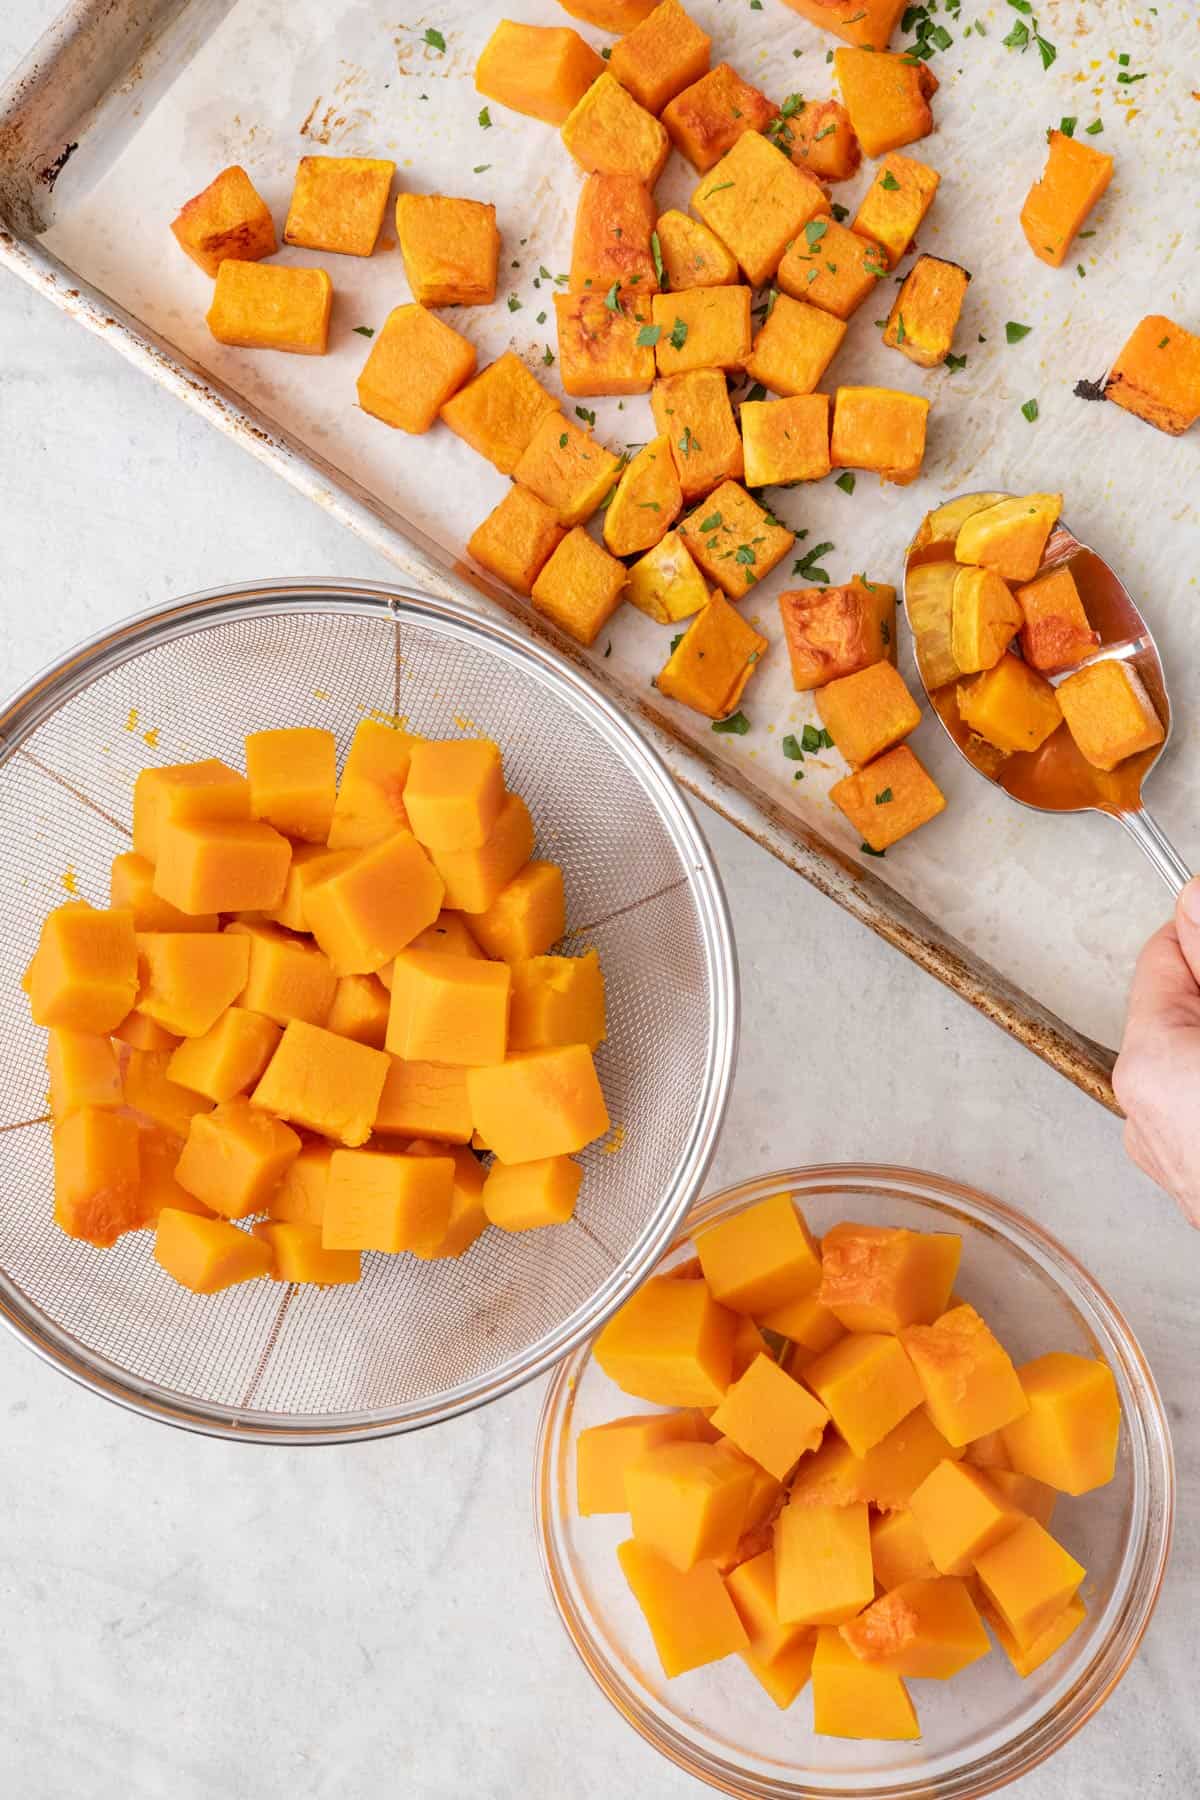 Cooked butternut squash cubes cooked three ways: roasted on a baking sheet, boiled in a strainer, and microwaved in a bowl.